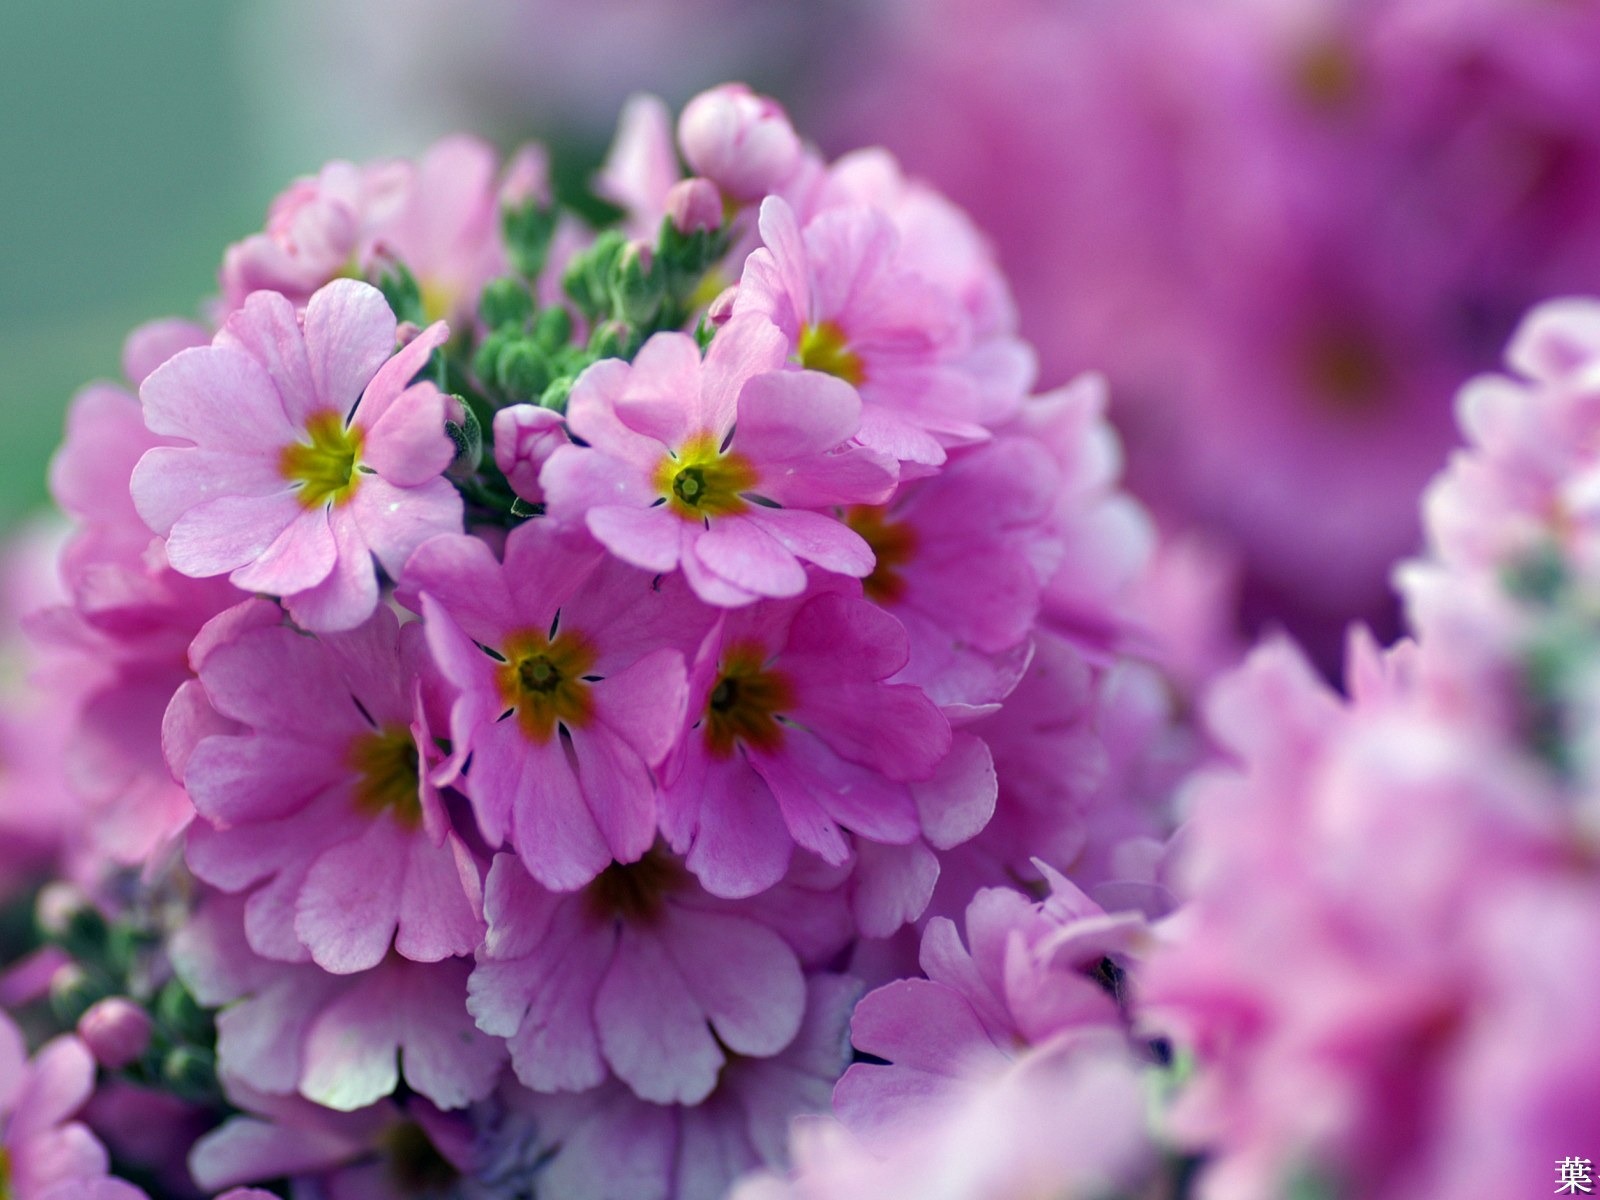 Personal Flowers HD Wallpapers #21 - 1600x1200